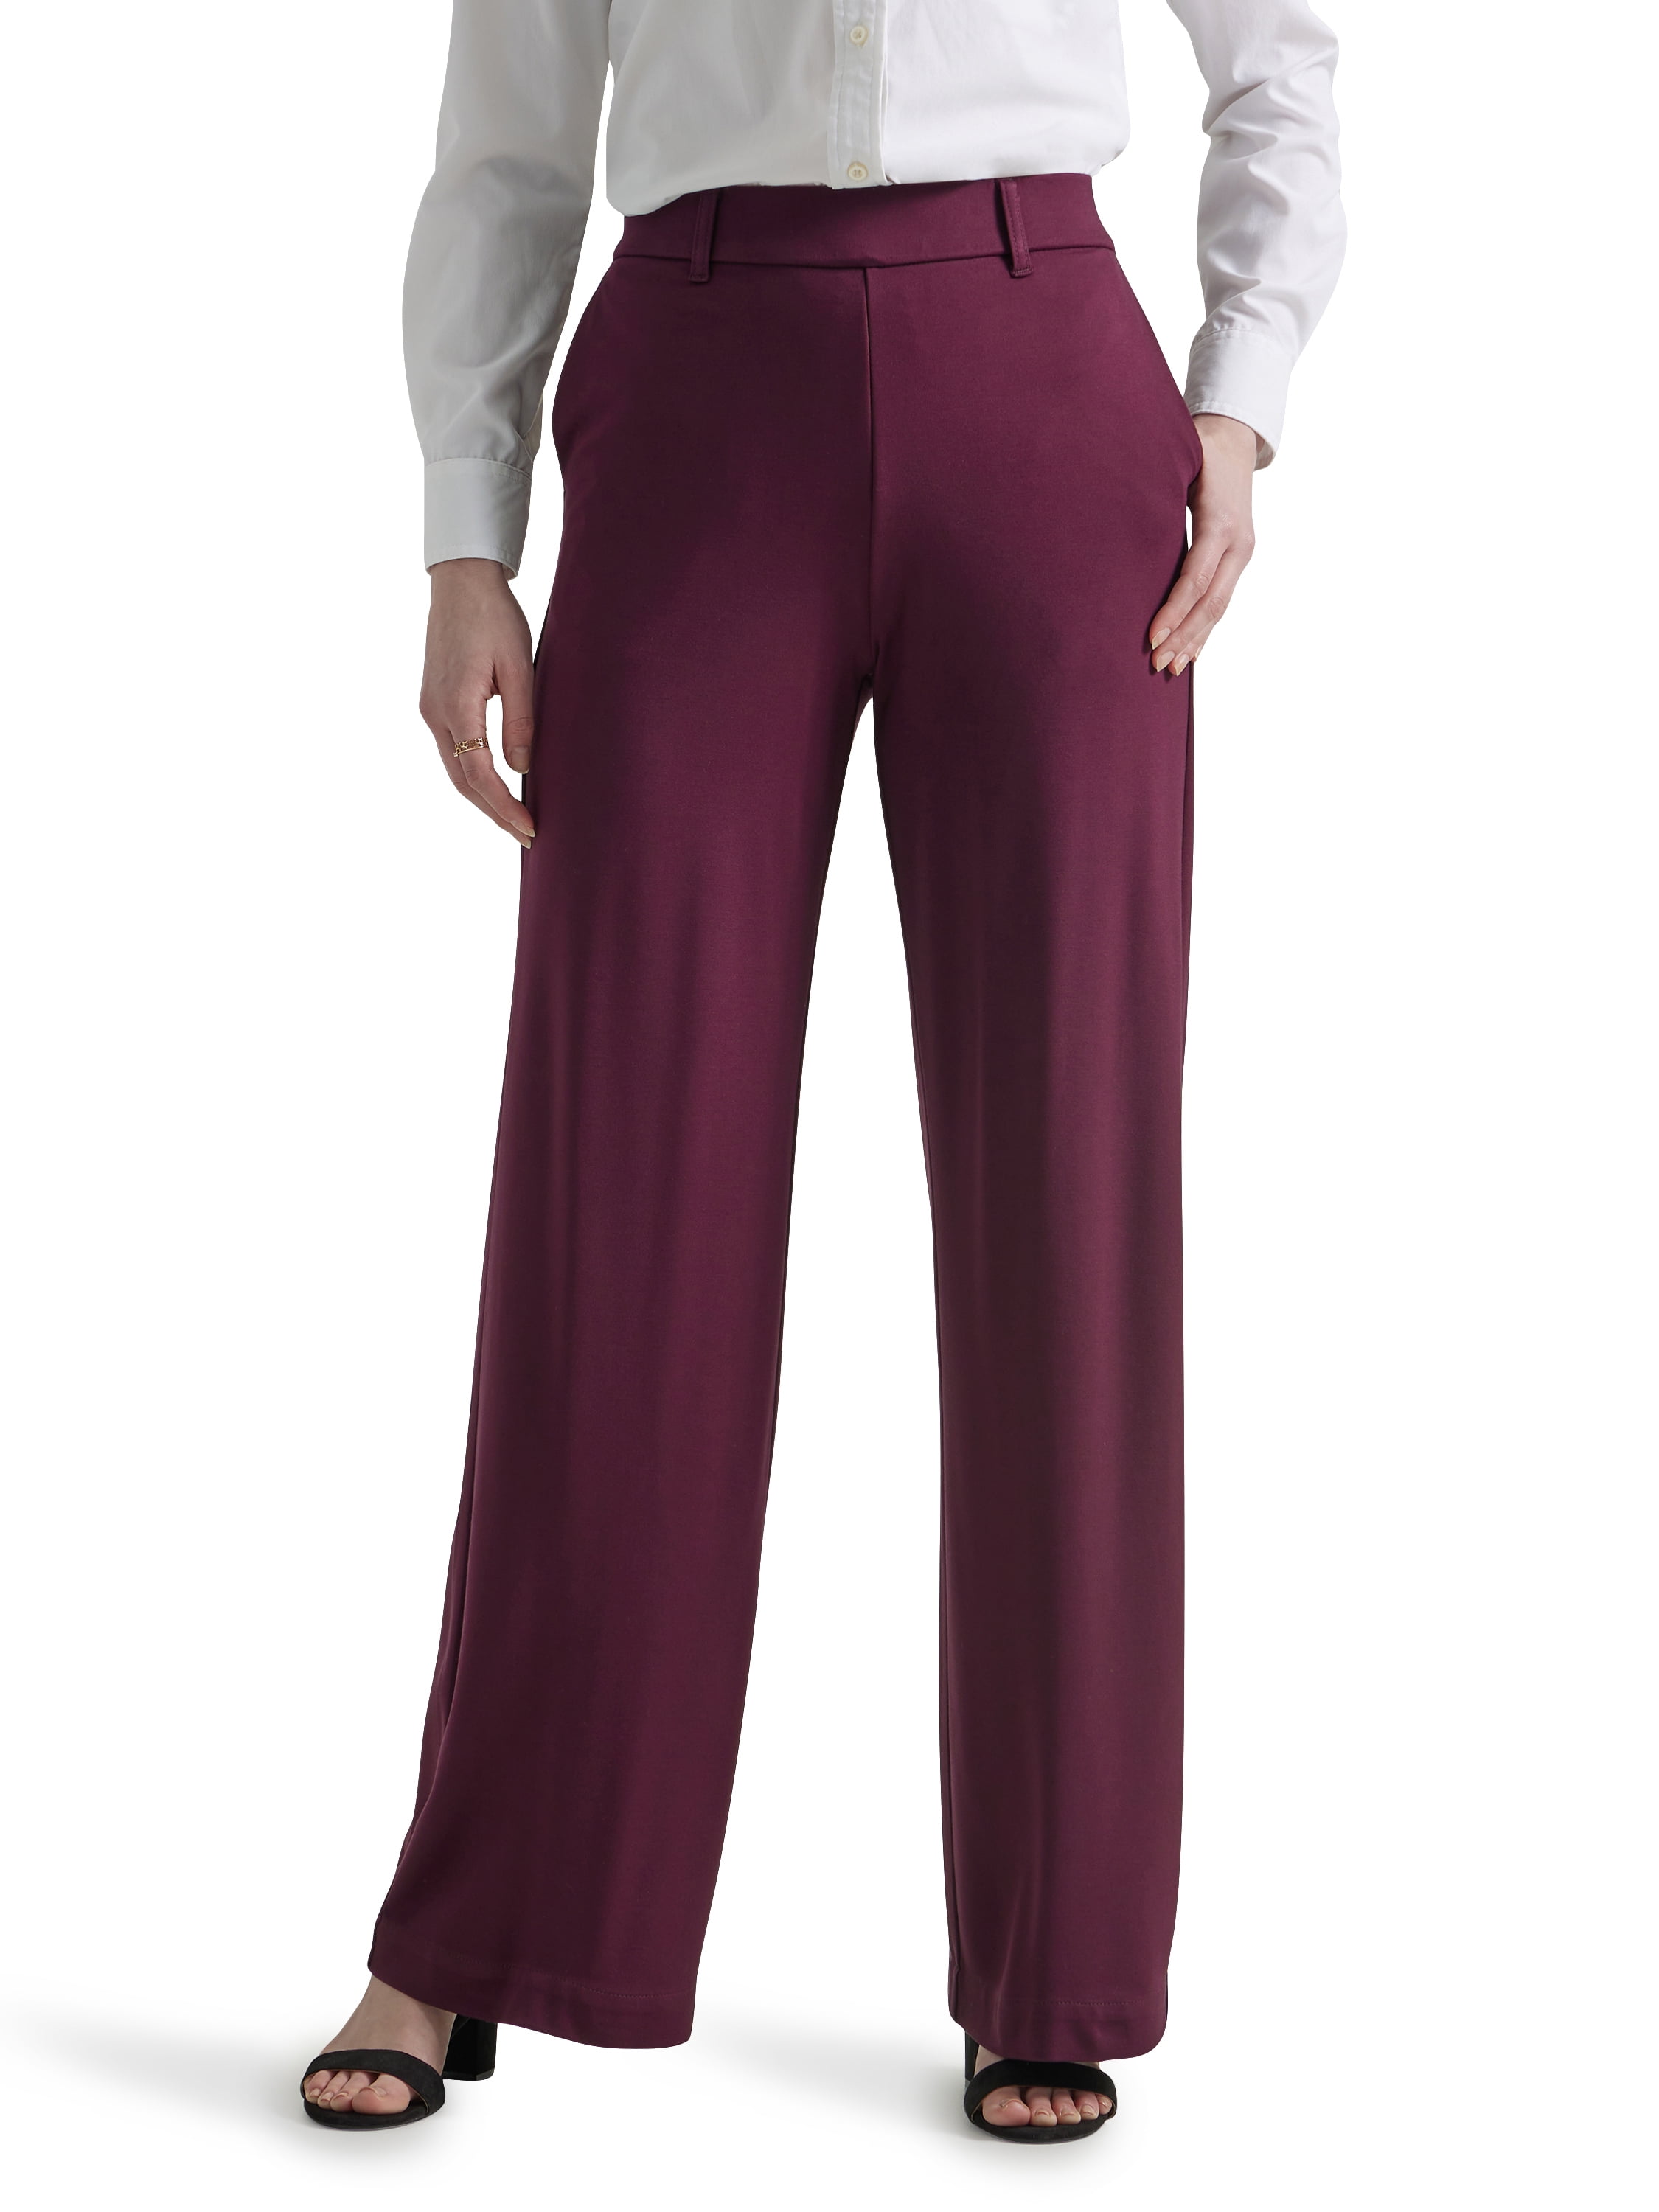 Lee® Women's Pull-On Comfort Waist A-Line Knit Pant 